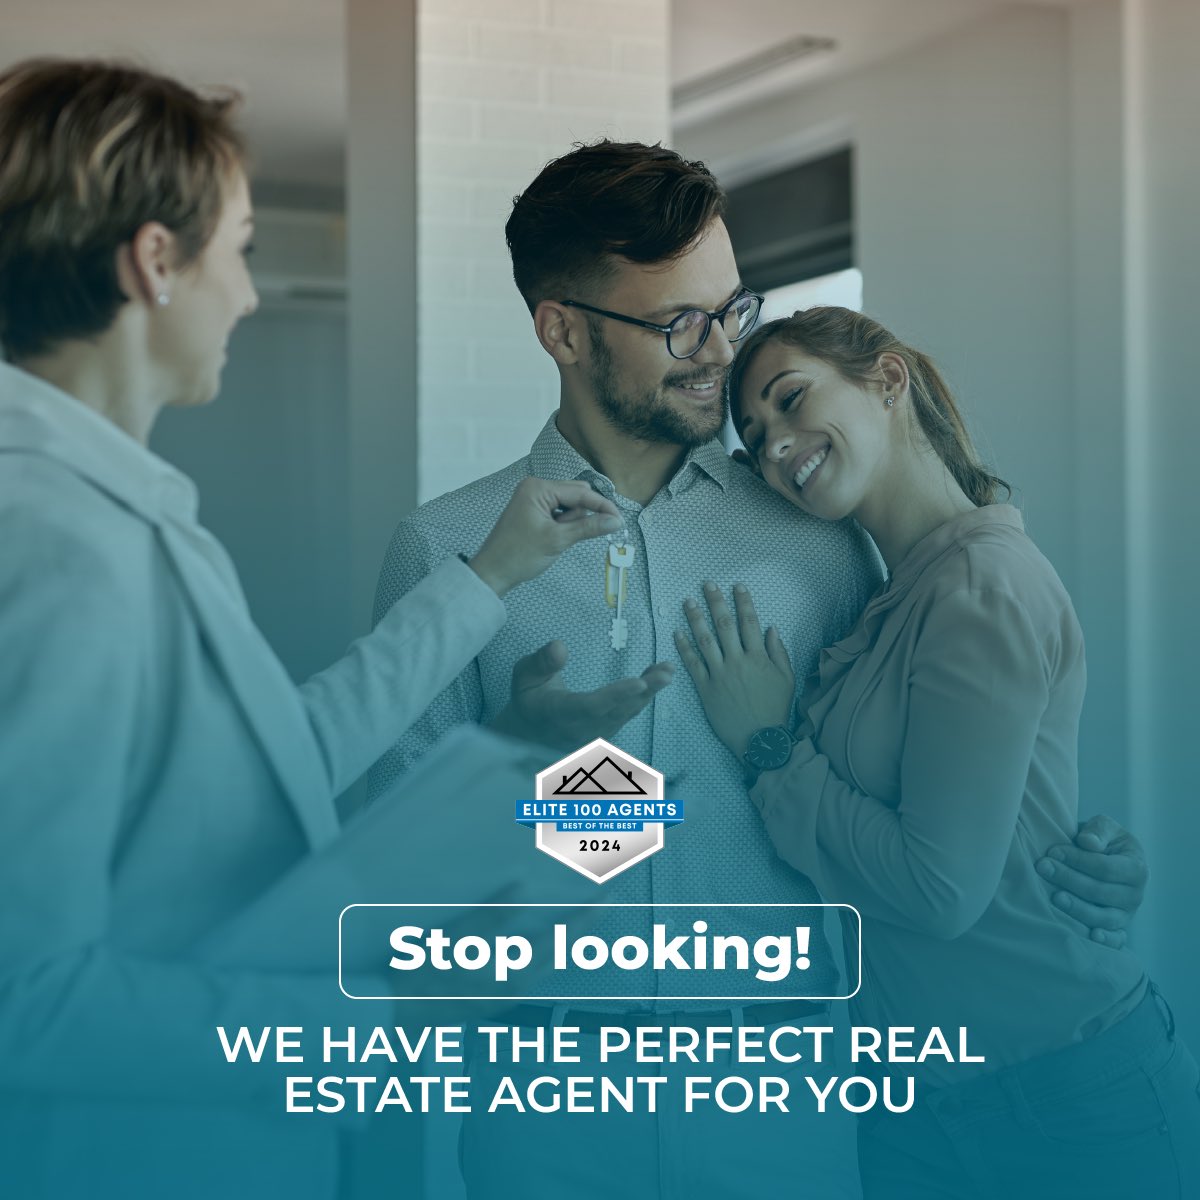 Our agents are among the best. 🙌 Remember, if you’re looking to sell your current house or buy a new one, our agents are what you’re looking for. 🤩 #realestate #realestateagent #luxuryrealestate #elite100agents #californiarealestate